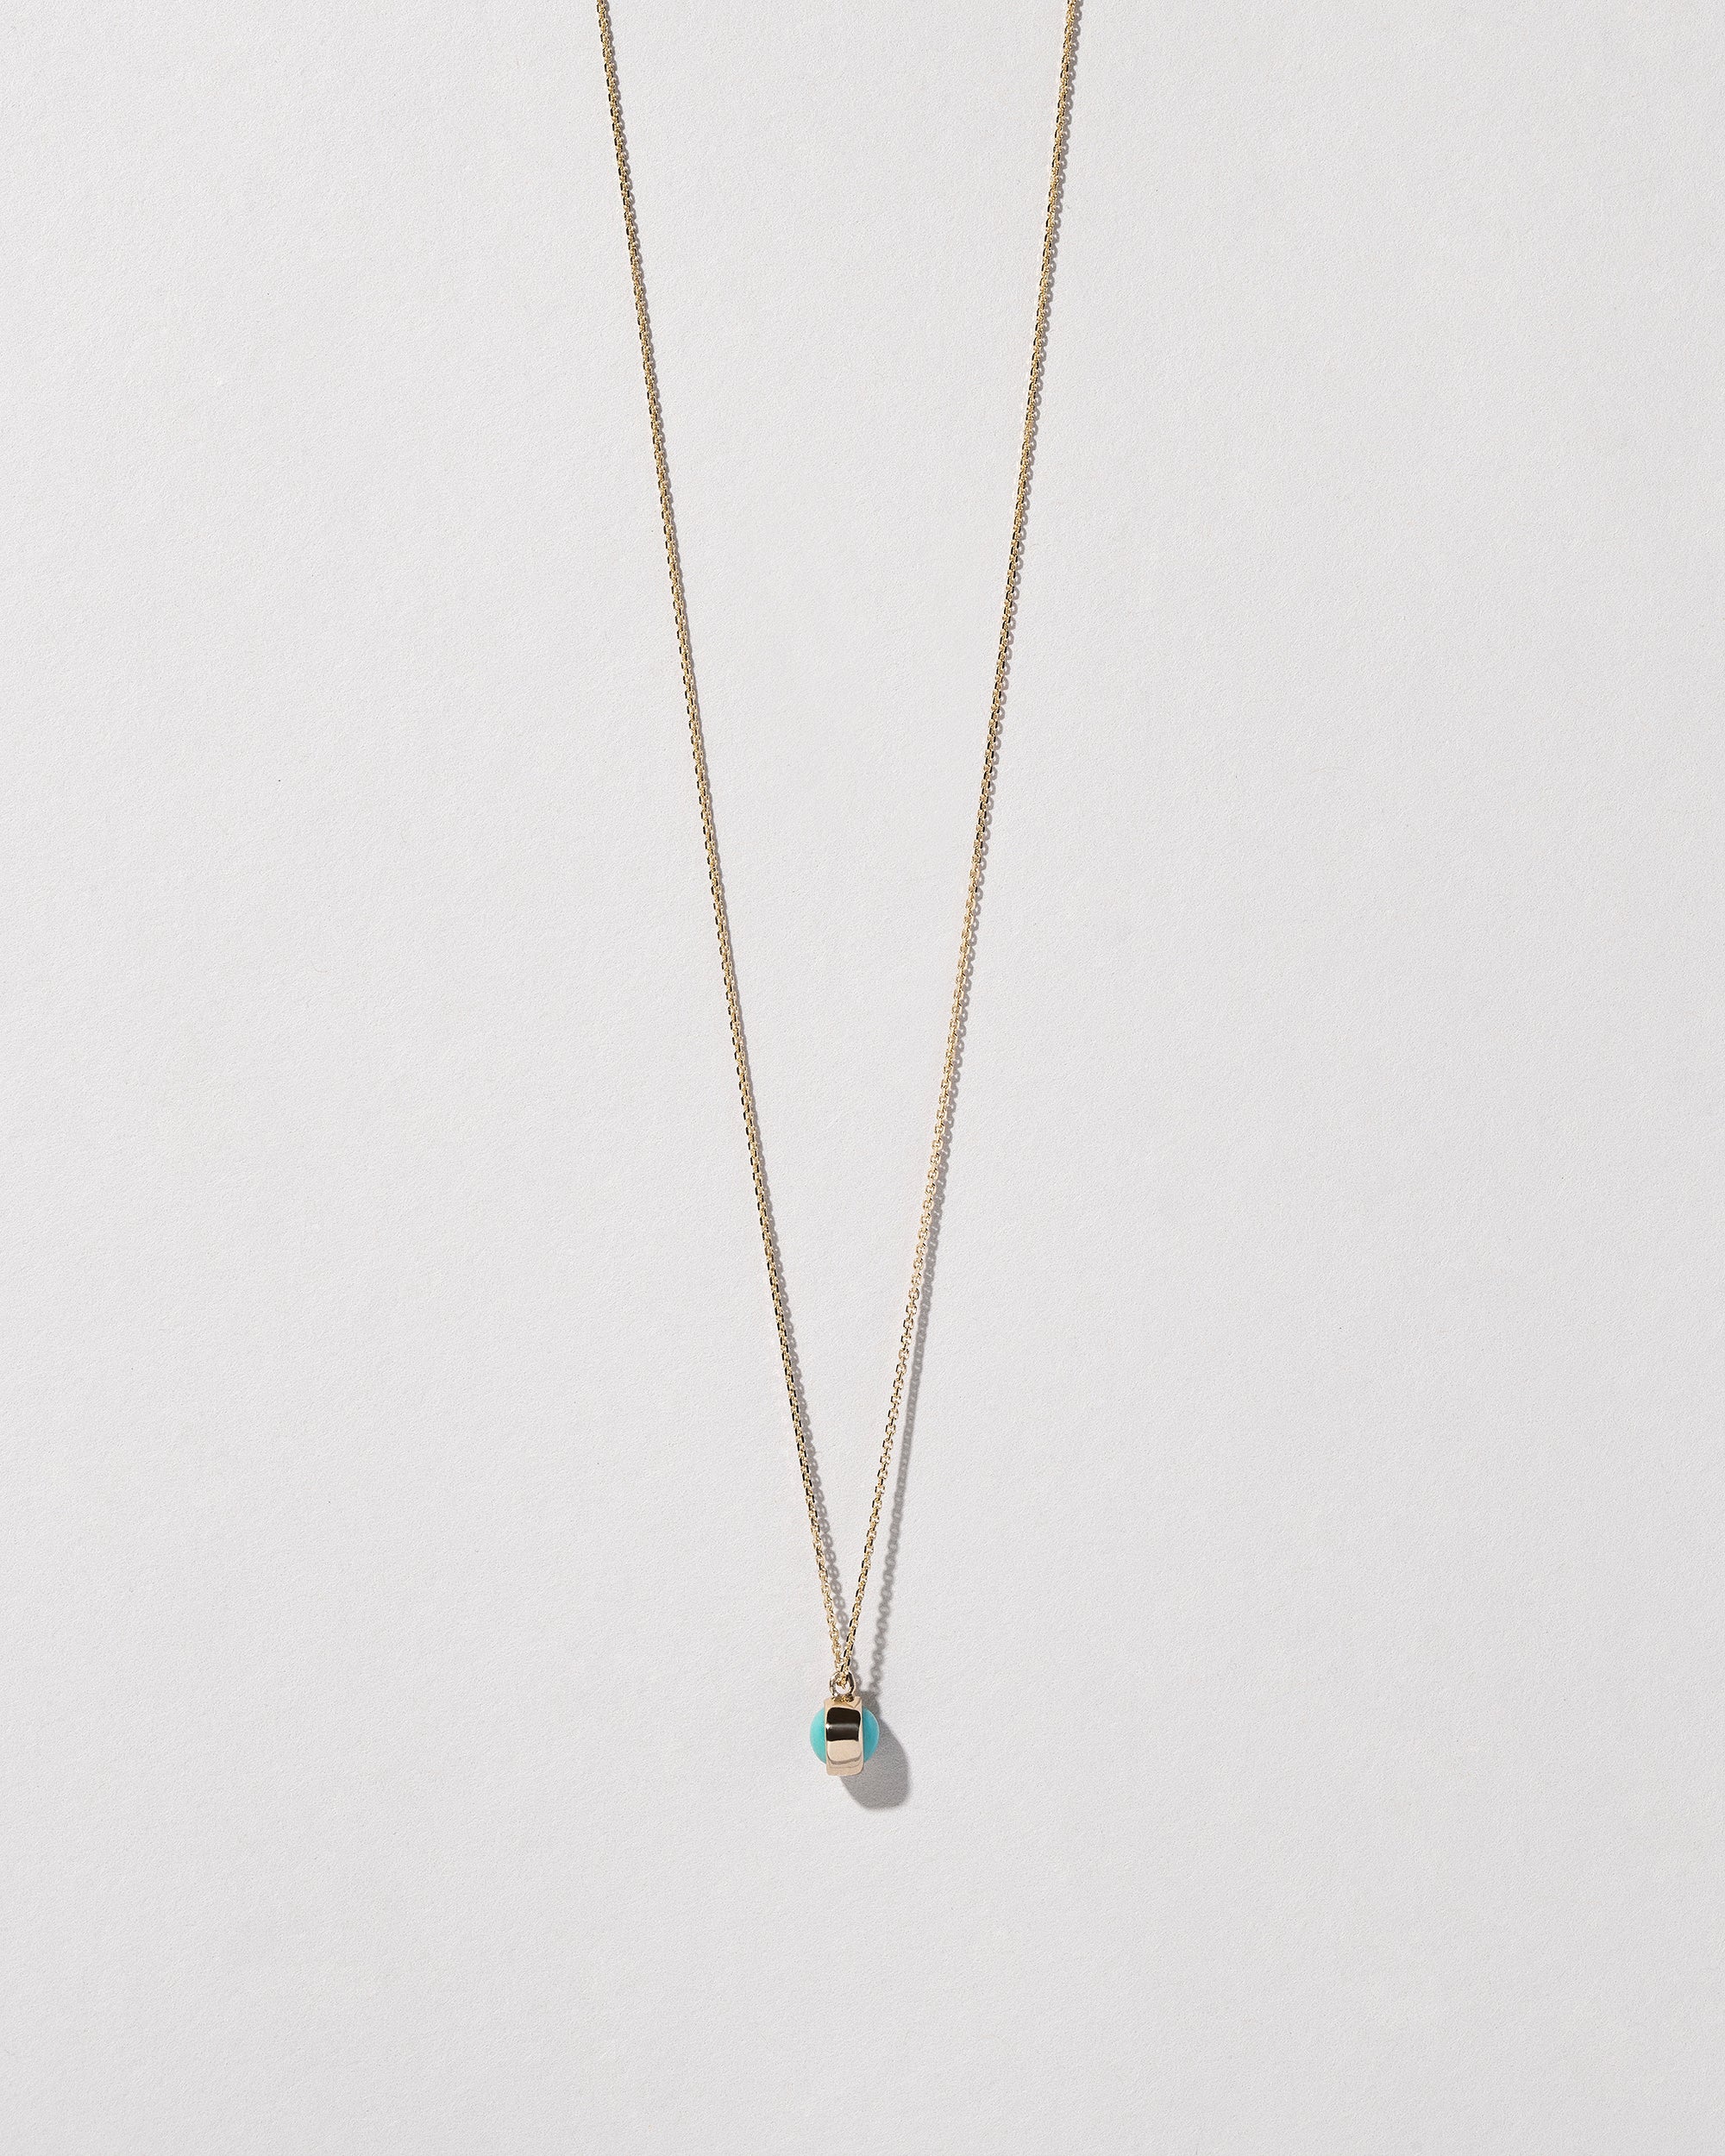 Birthstone Signature Name Necklace (Rose Gold)